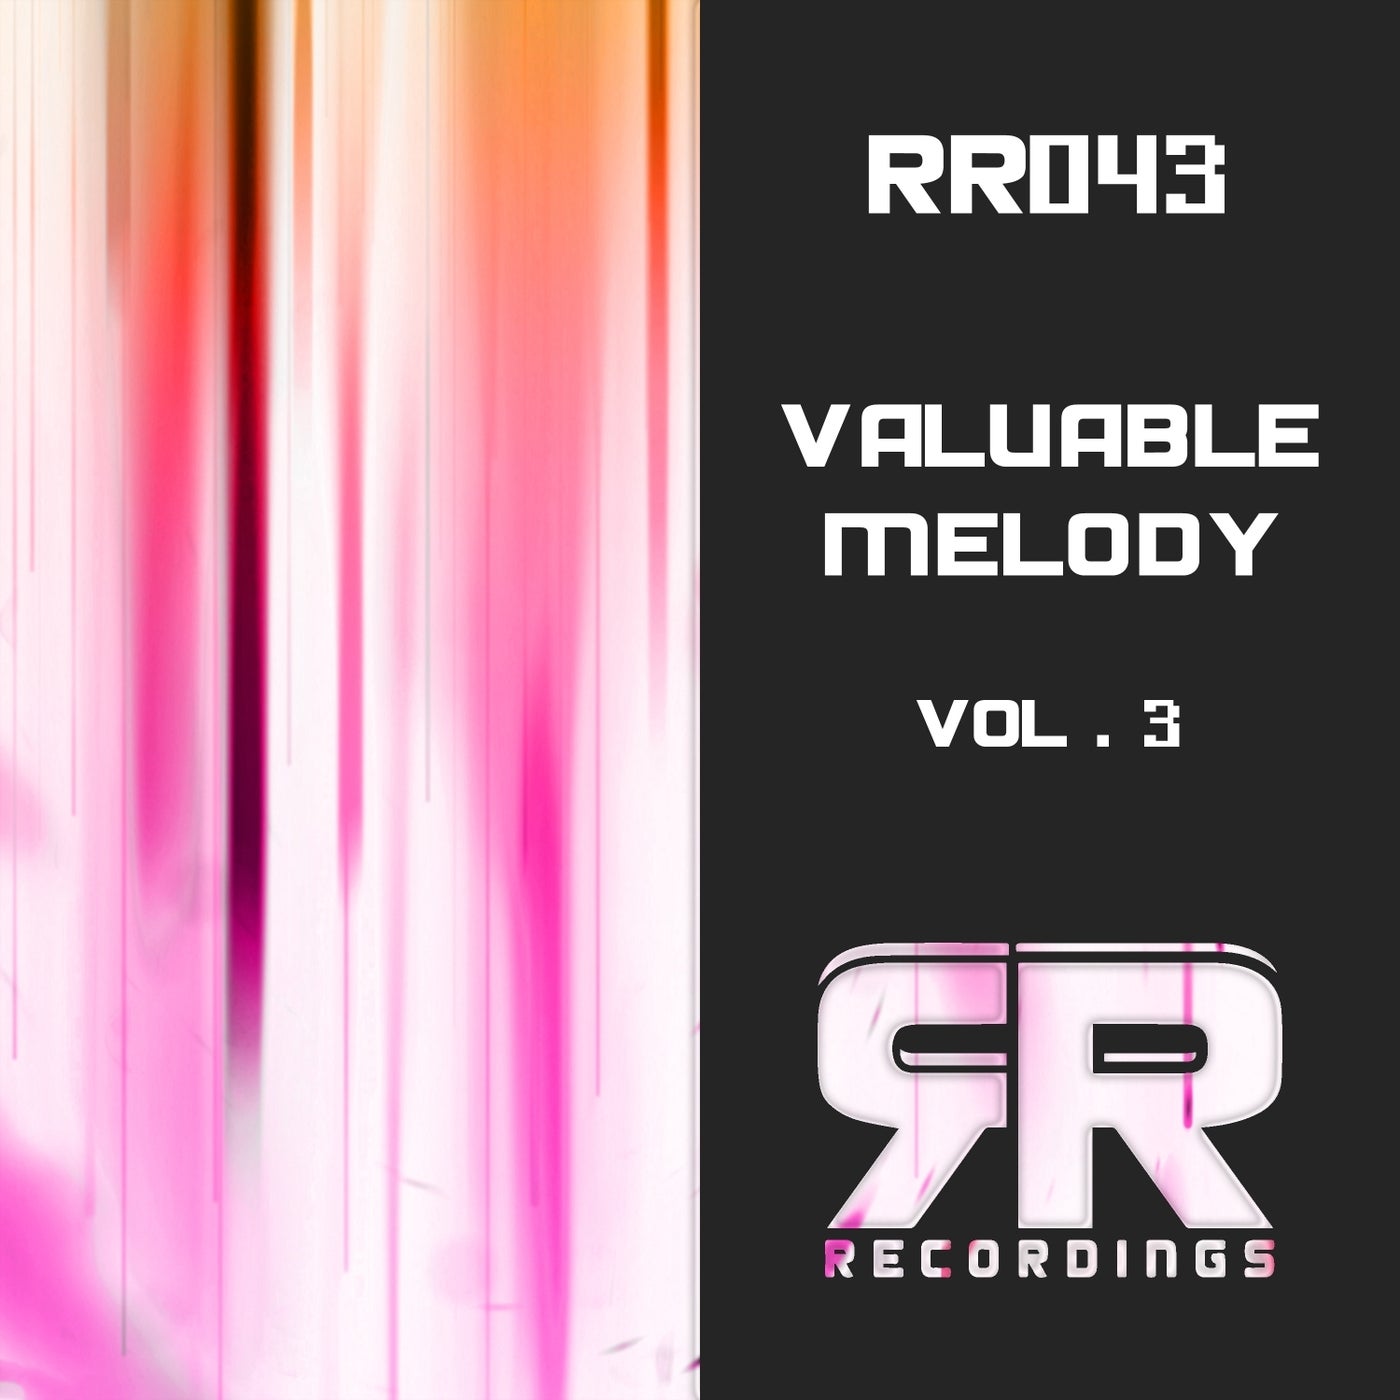 Valuable Melody, Vol. 3